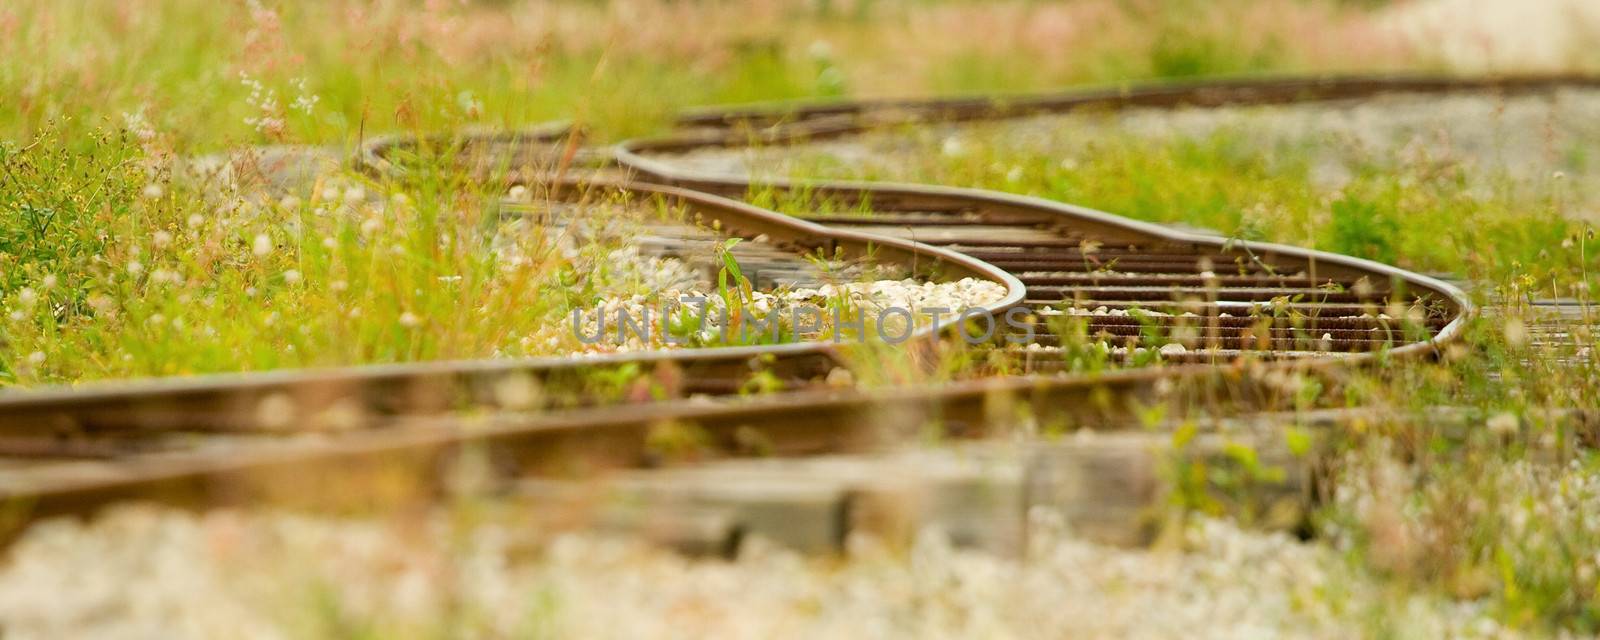 Panoramic view of old railway track in green grass.